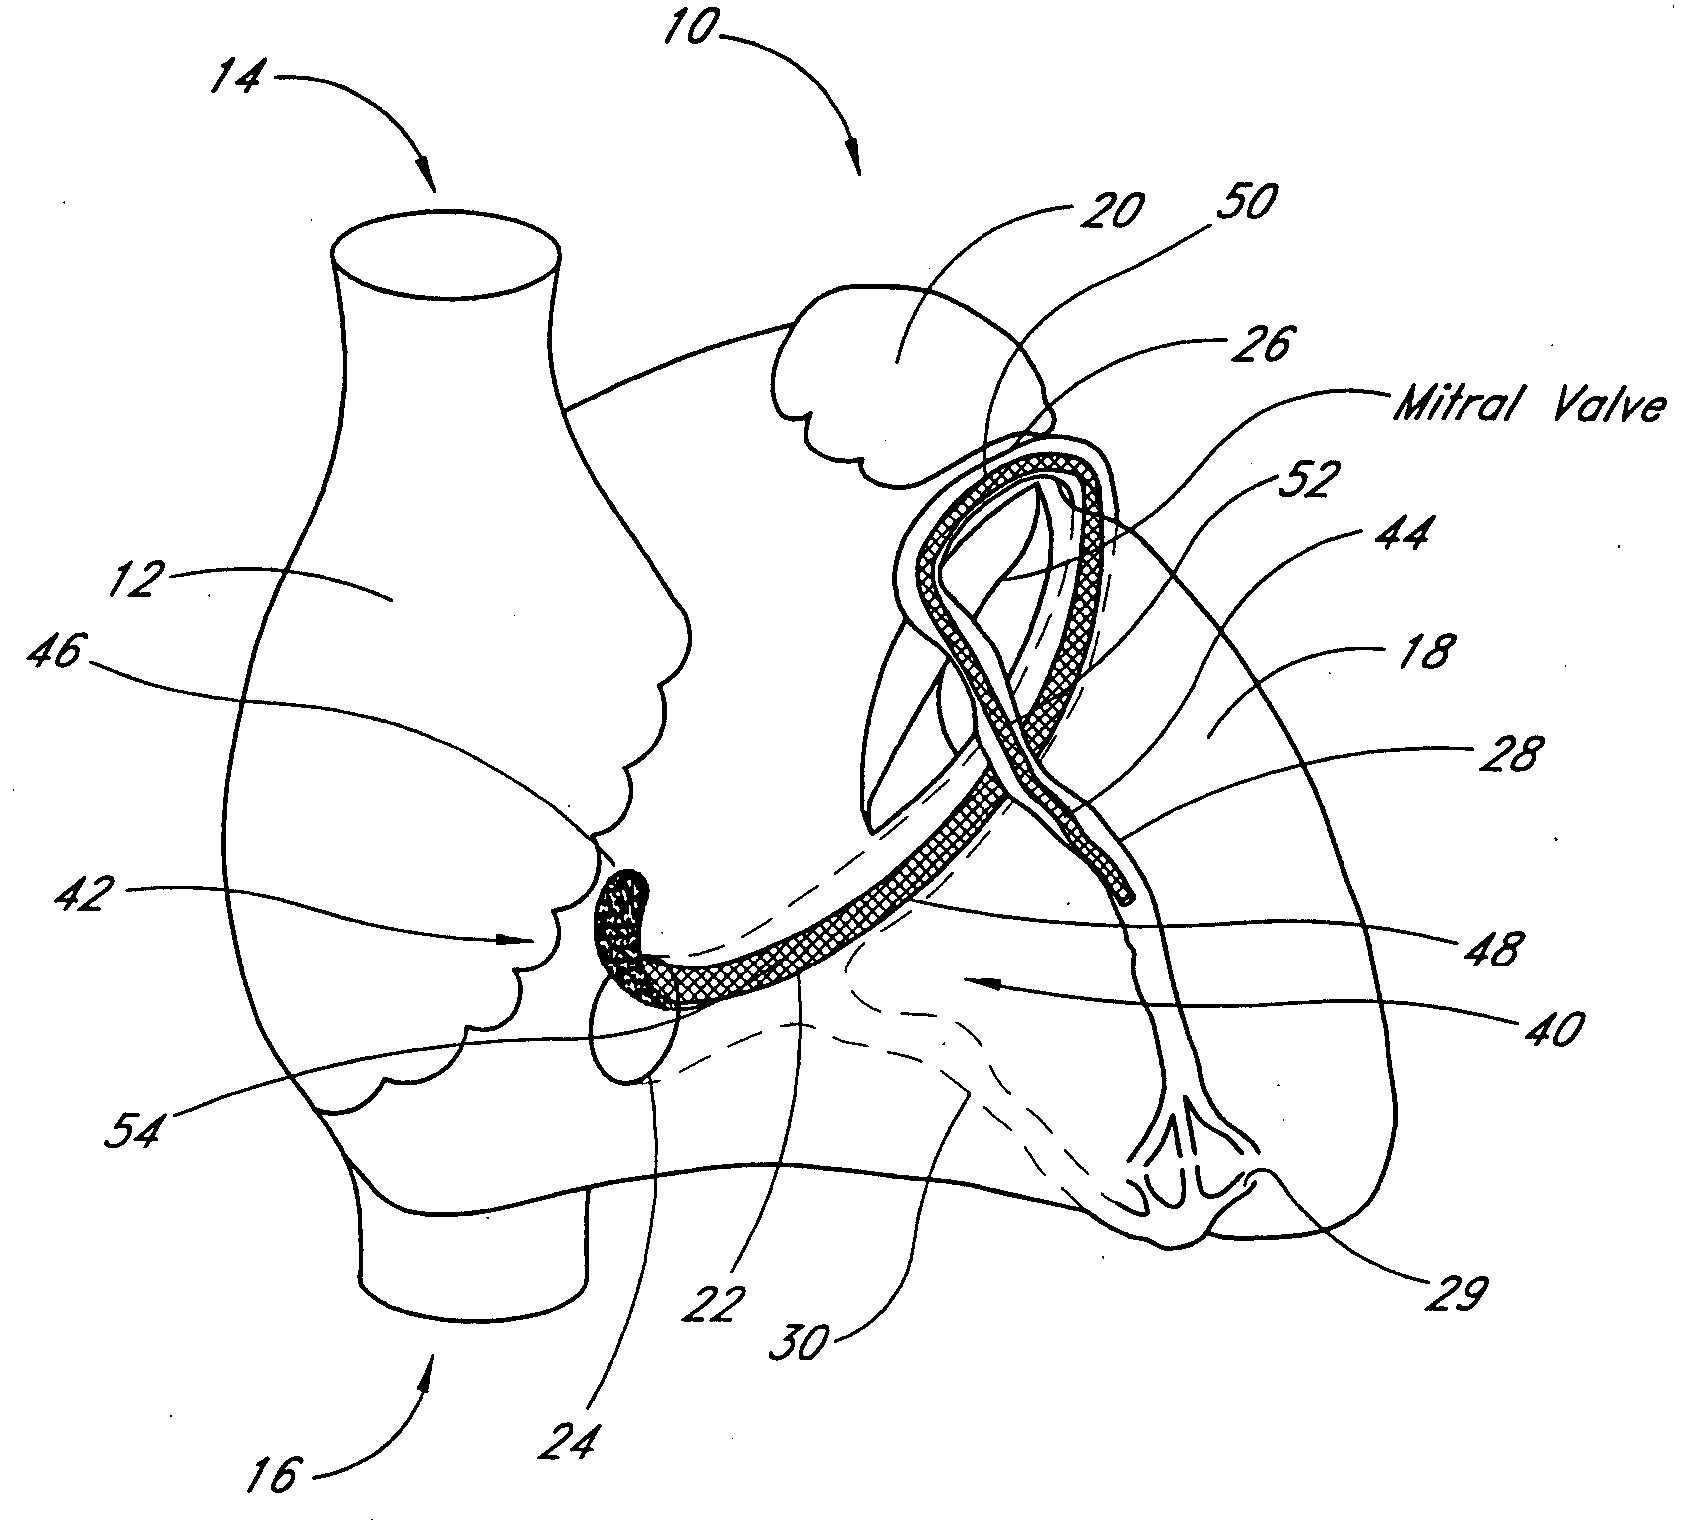 Methods and apparatus for remodeling an extravascular tissue structure